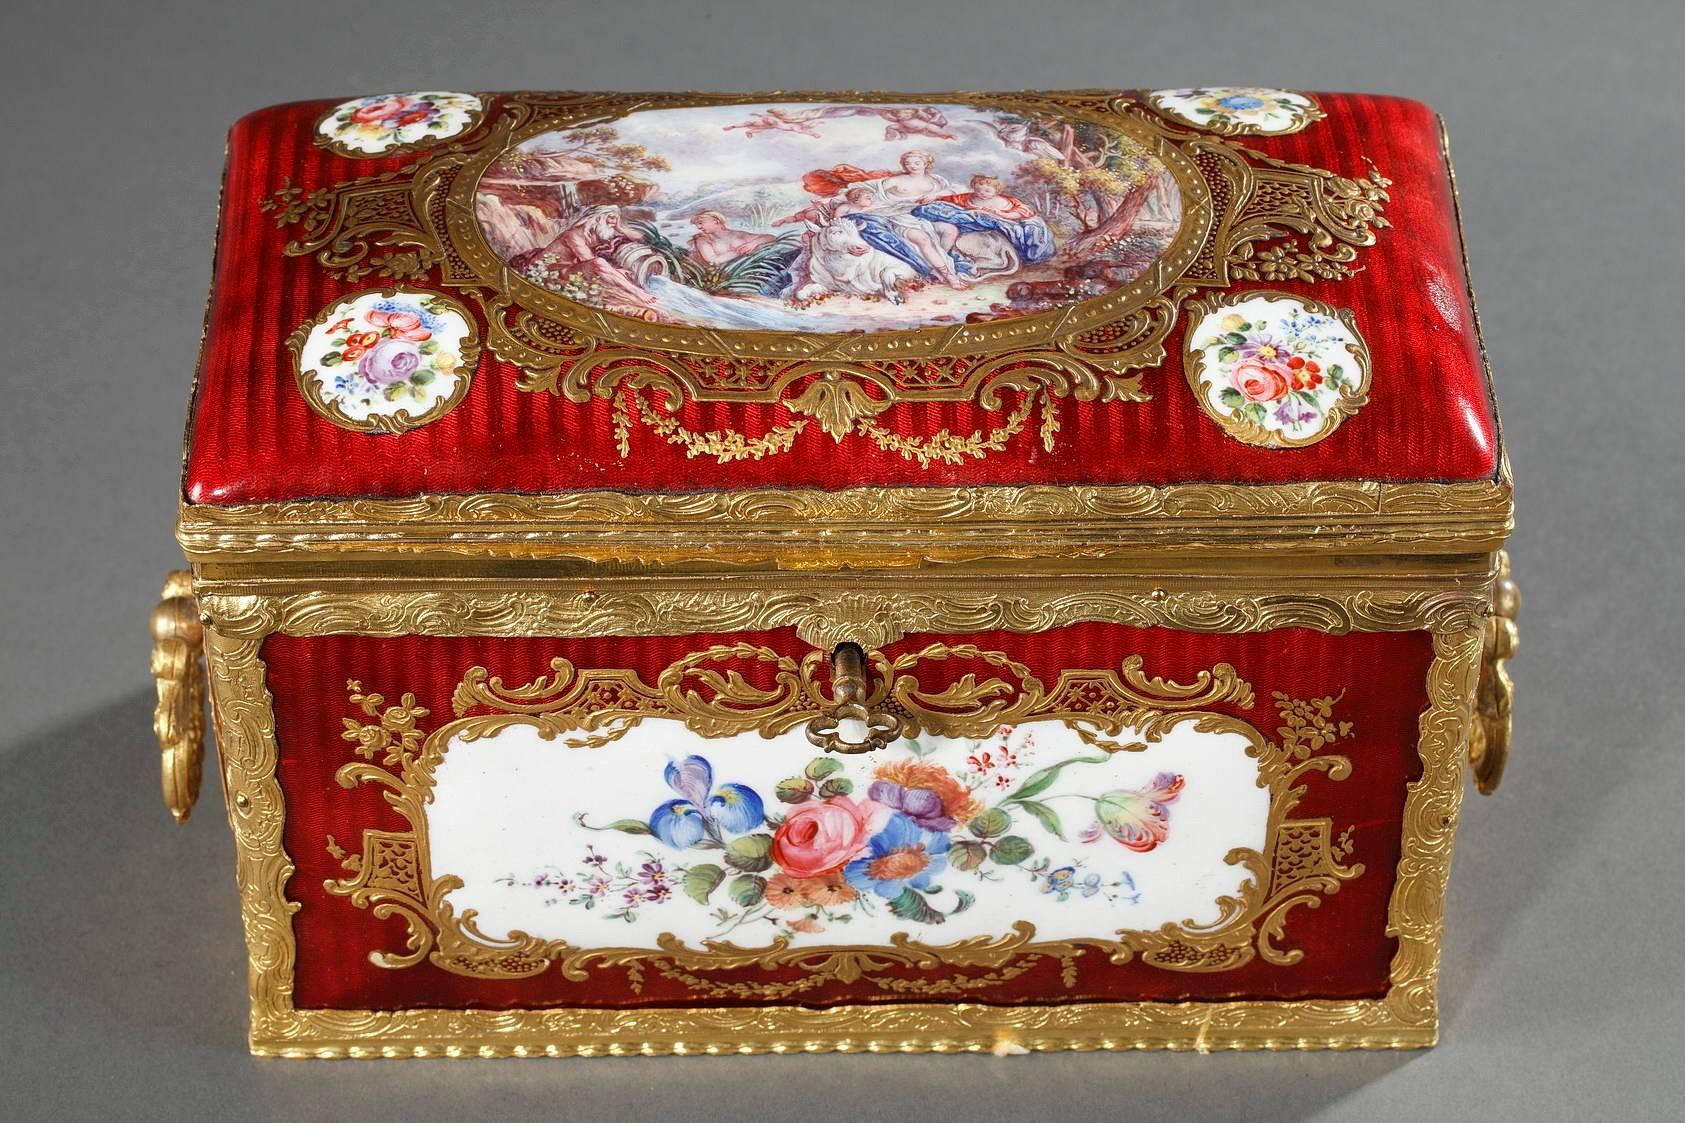 Rectangular, red enamel keepsake box with a gilt bronze frame that is very elaborately sculpted with leafy scrollwork. The body of the box is decorated with medallions featuring multicolored bouquets of flowers on a white background. The medallions